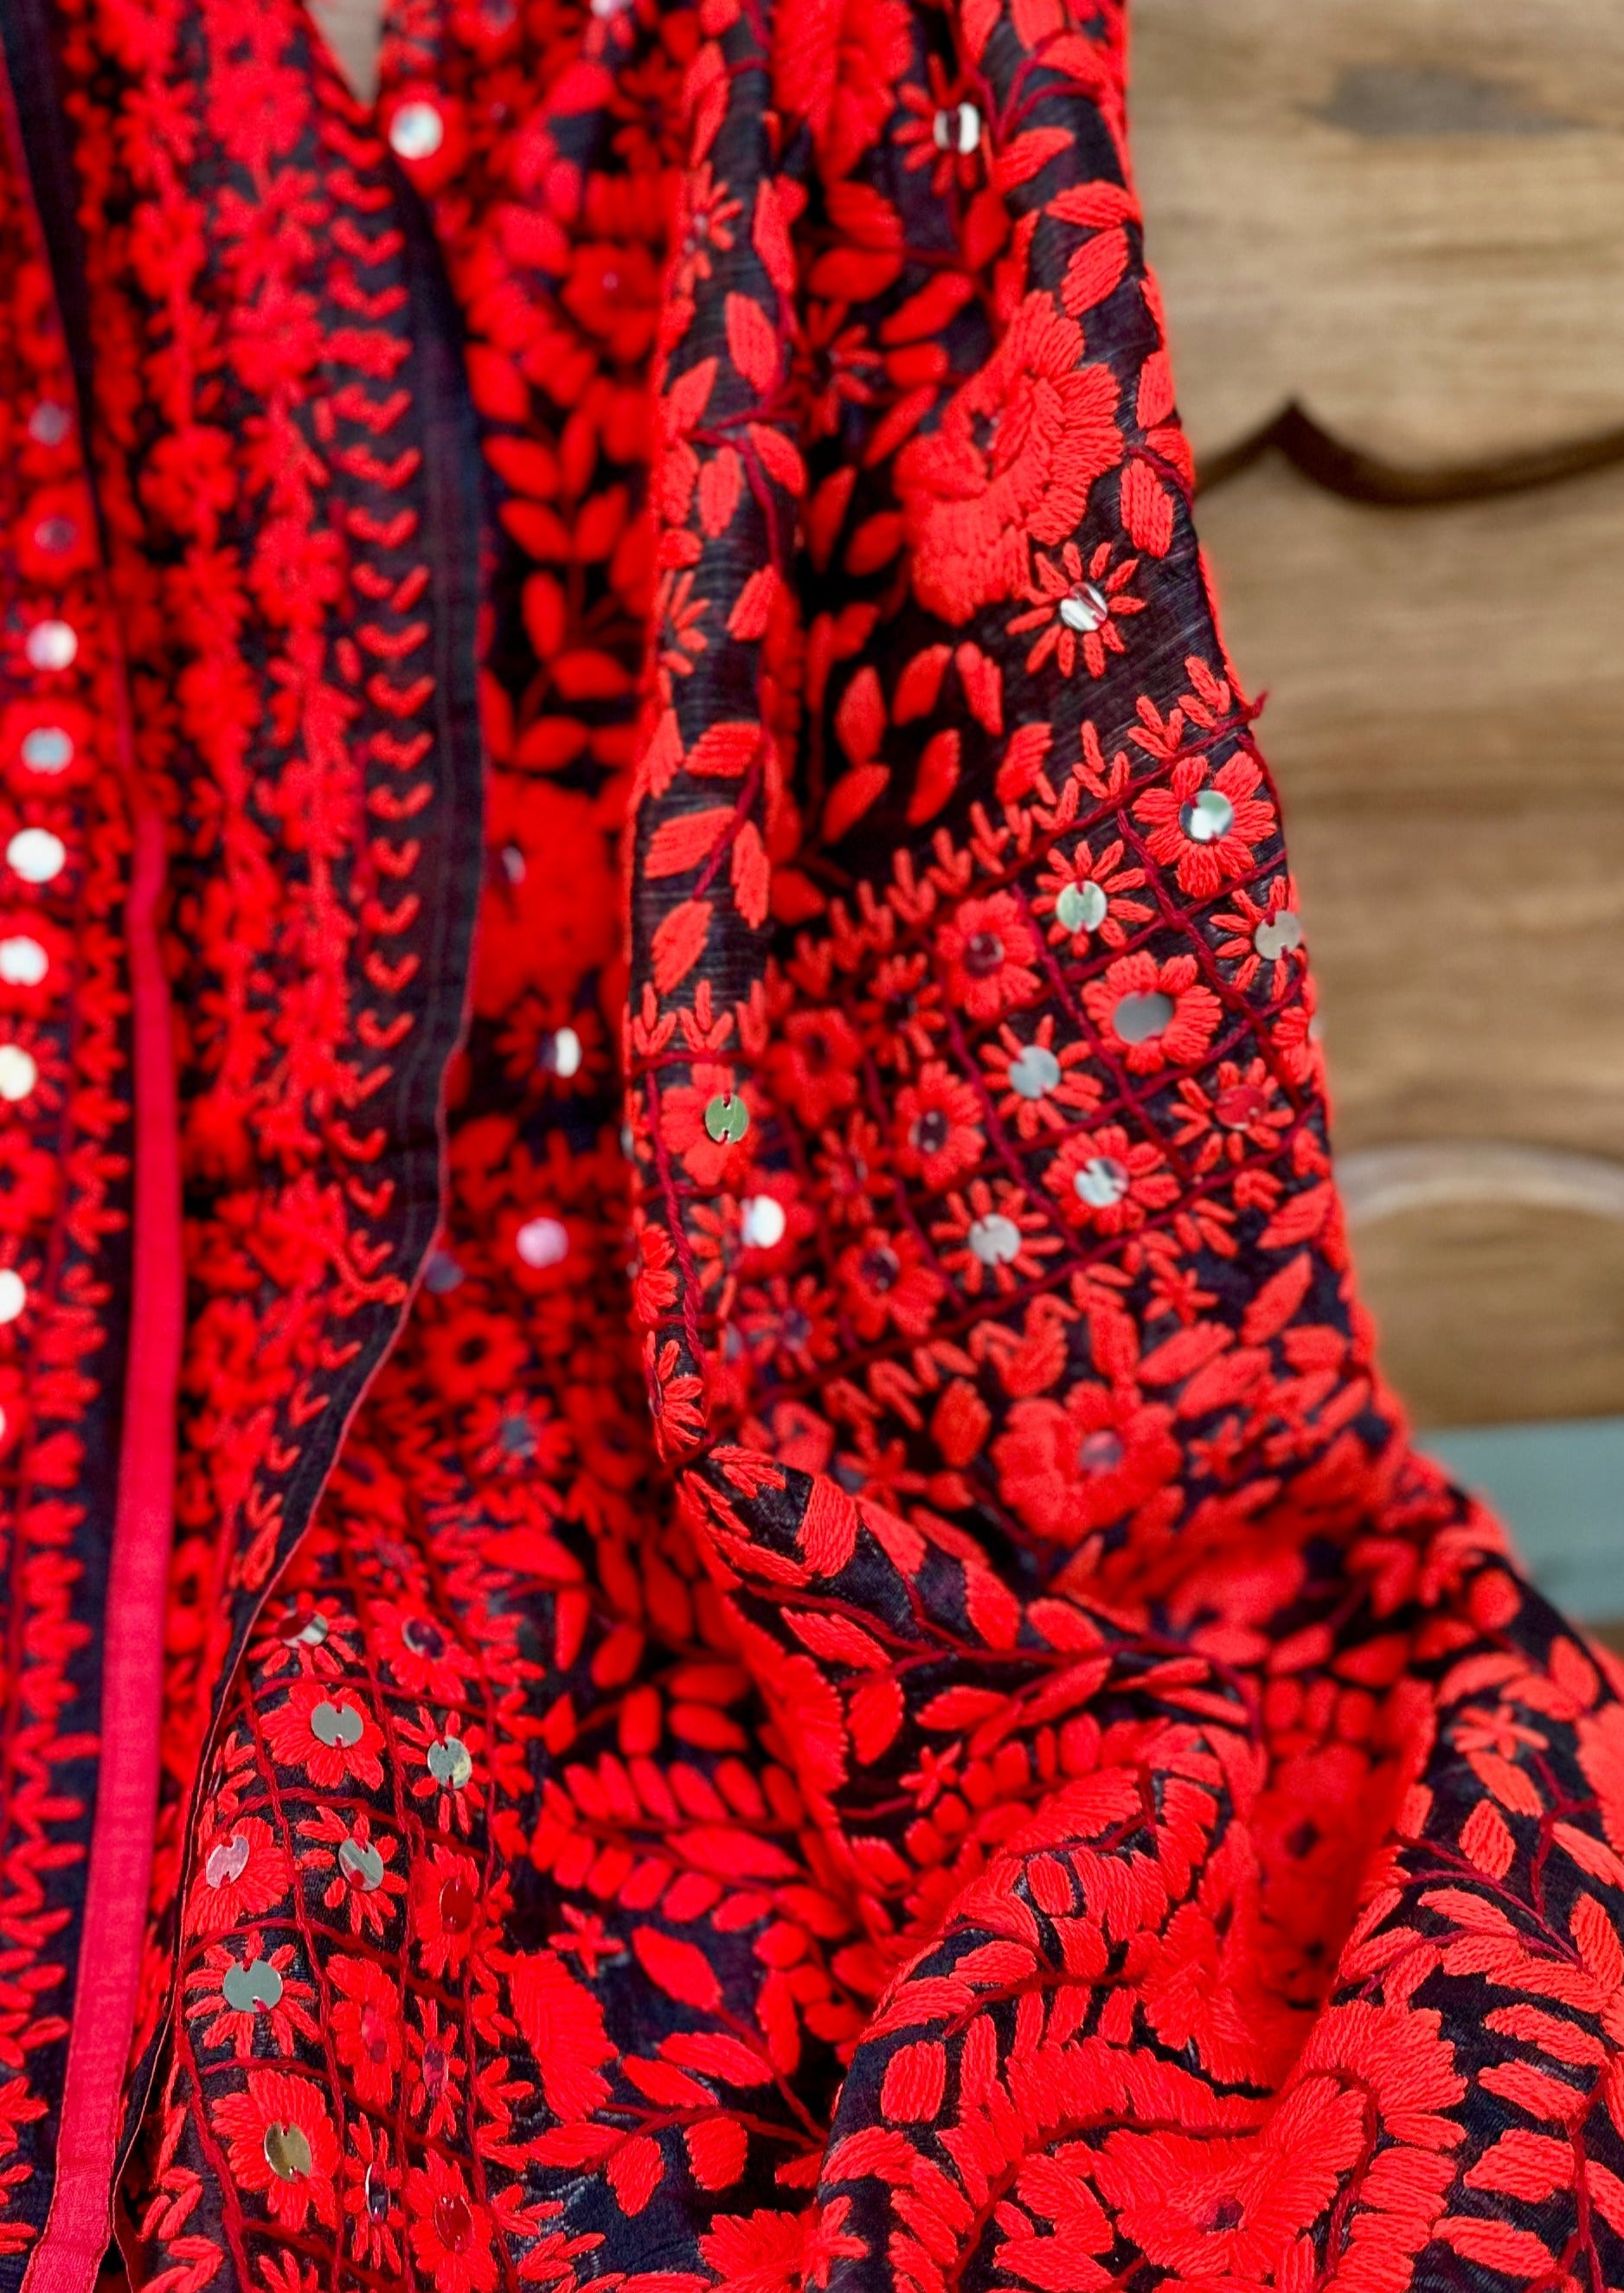 Honor Your Mom with a Special Gift this Mother's Day I Red Shawl I Evening Wrap I Mothers Day Gift I  Embroidery Shawls I Formal Evening Wrap - DharBazaar